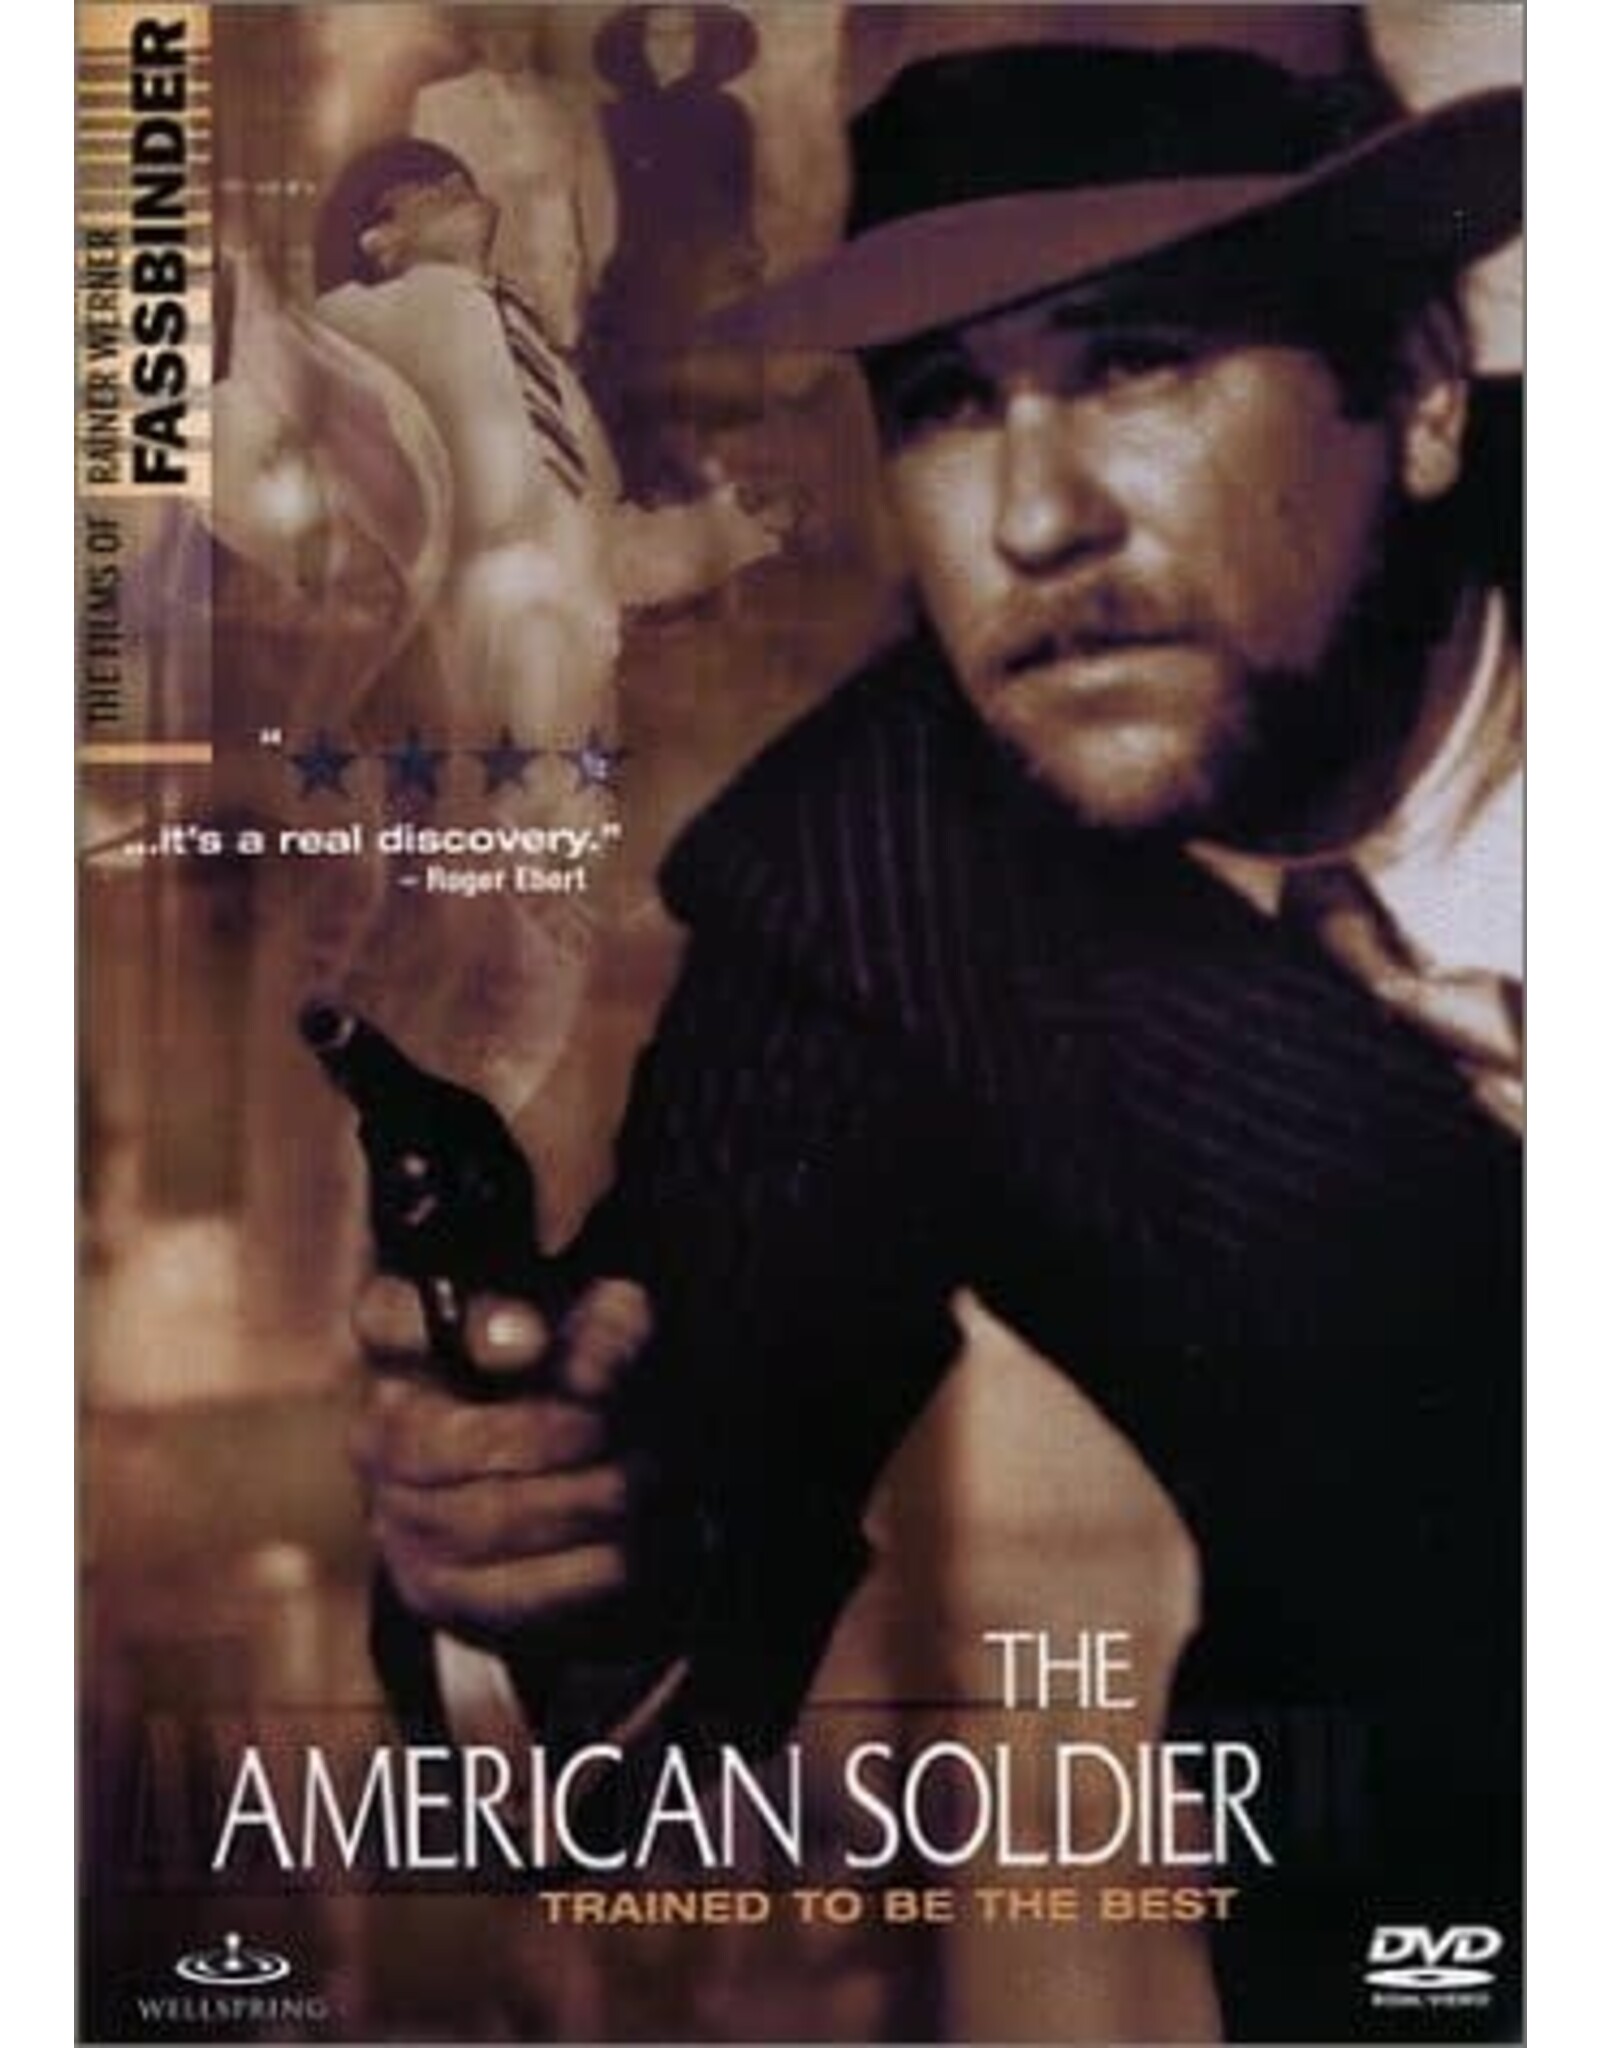 Cult & Cool American Soldier, The